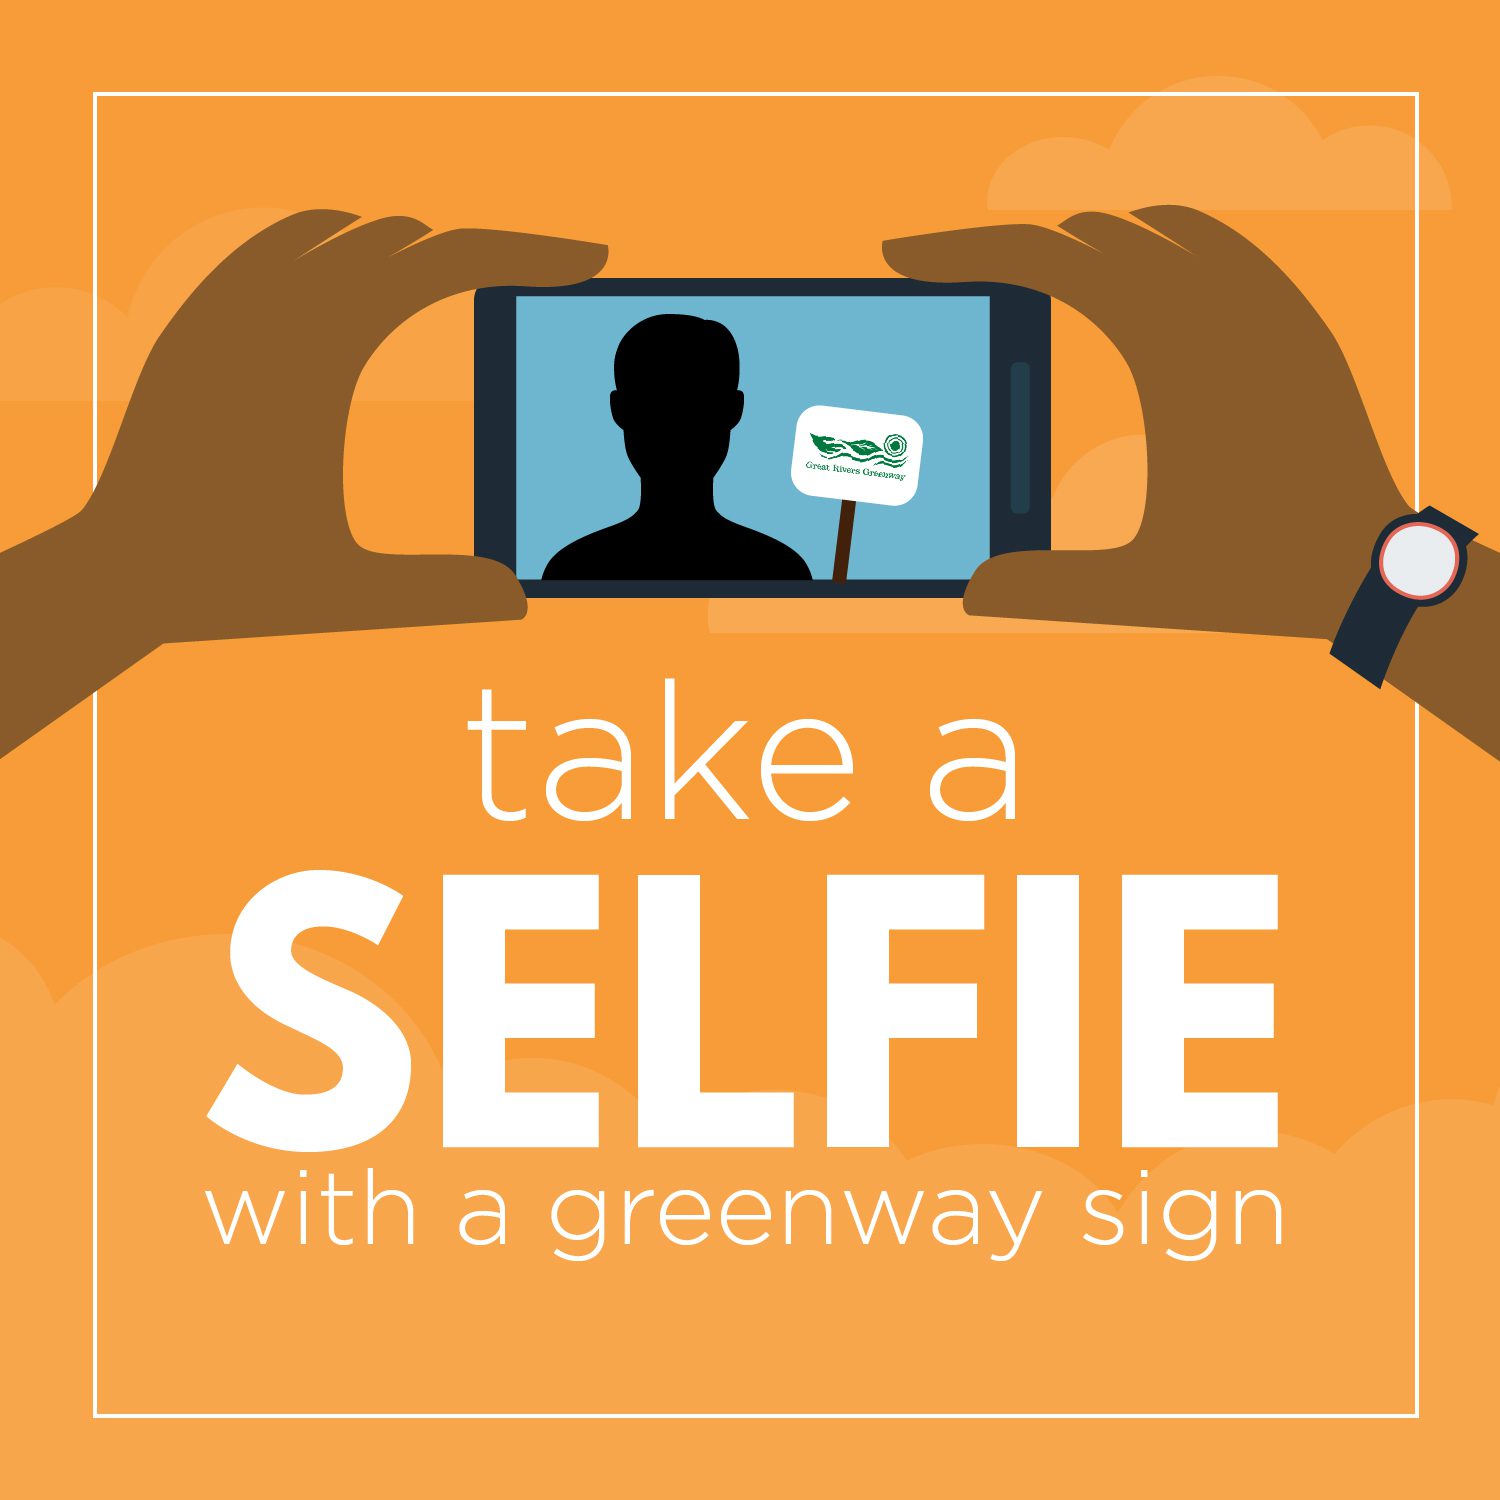 Take a selfie with a greenway sign